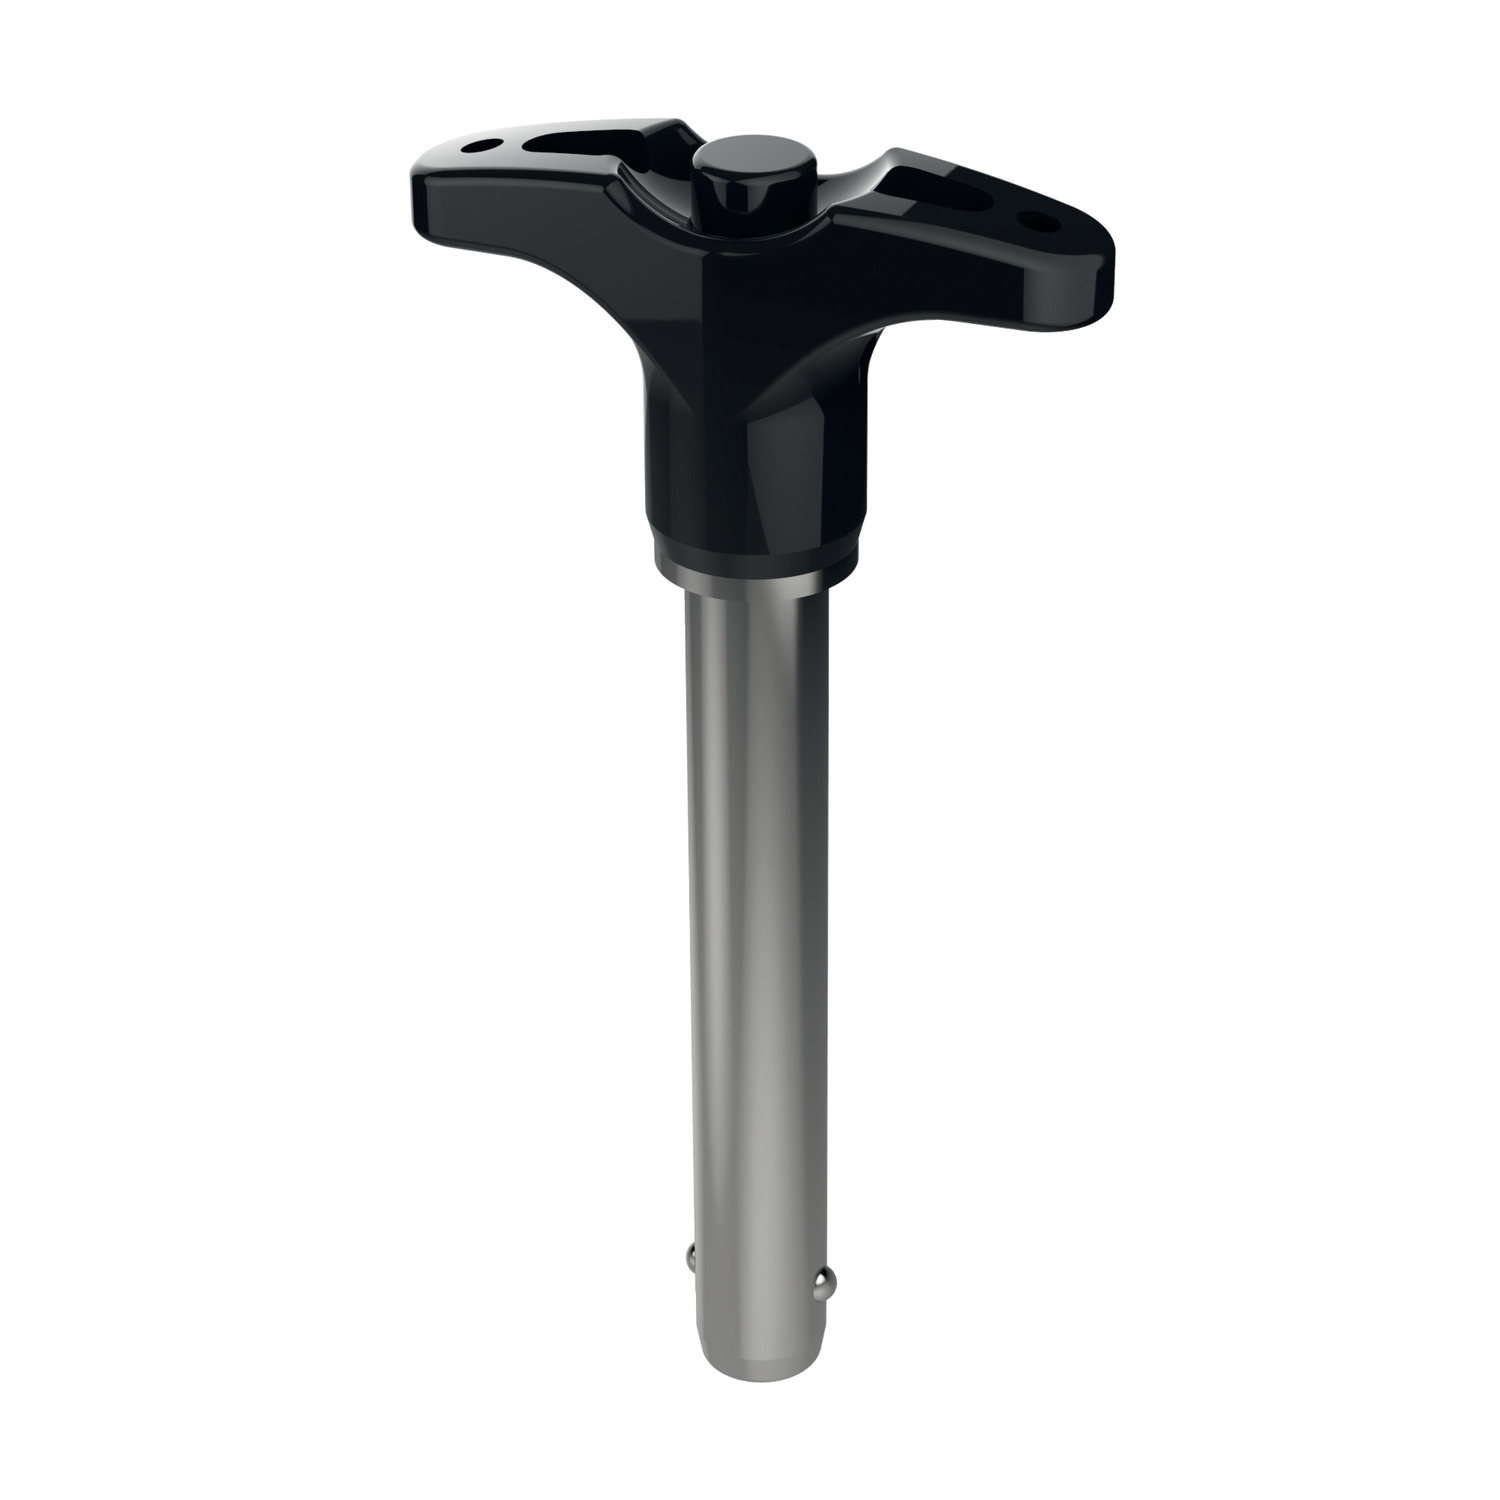 Ball Lock Pins - Single Acting - T-Handle Single Acting T-Handle ball lock pins quick fastening and locking of frequently repeated connections. Handle offers confidence in handling and installation.